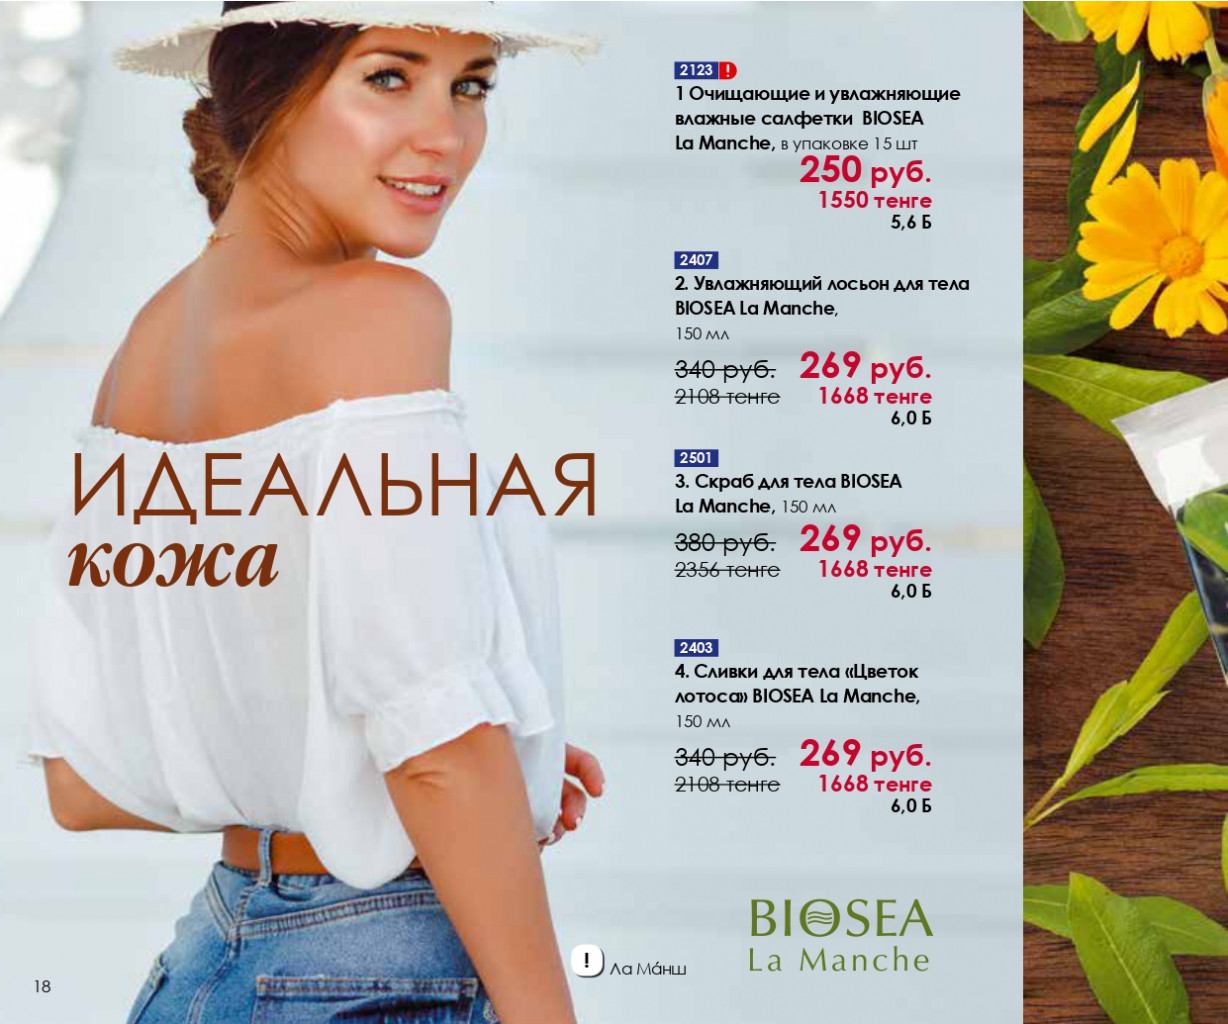 Catalog-biosea pages-to-jpg-0018.jpg